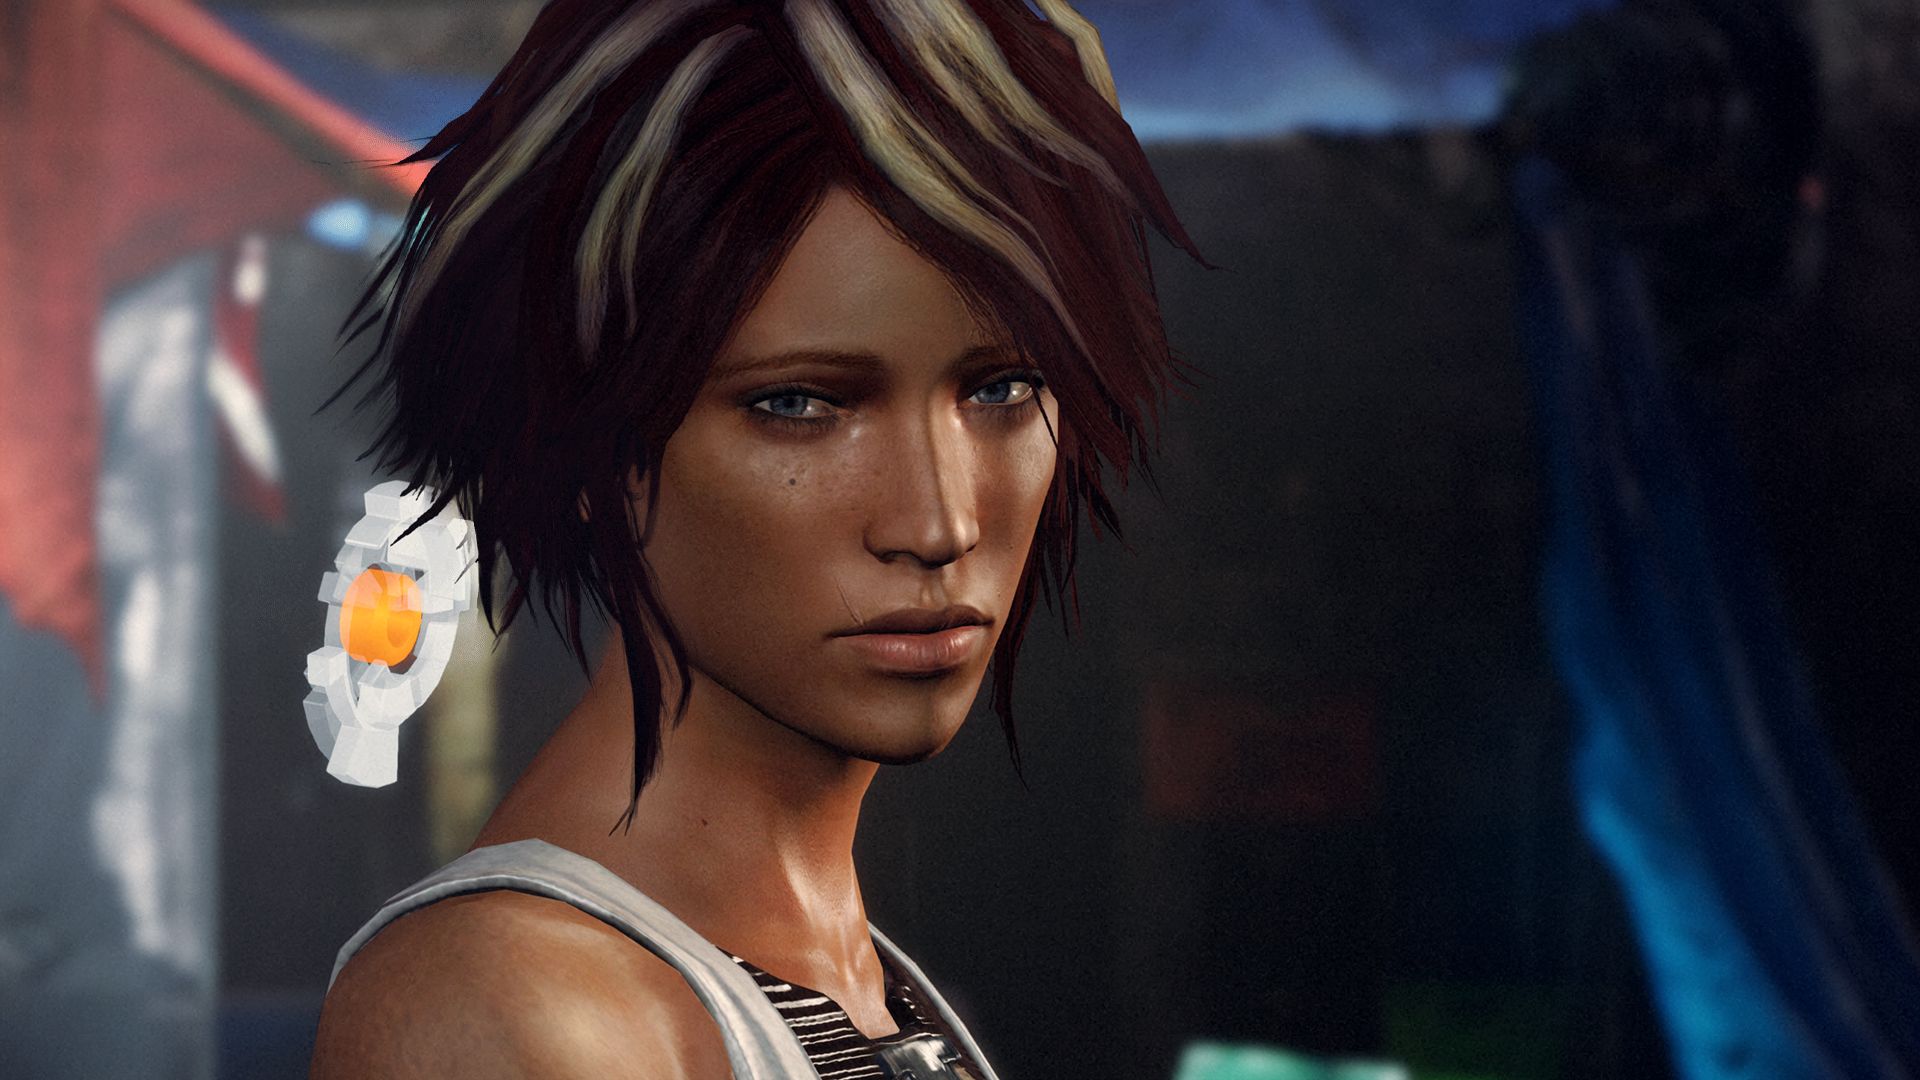 The 5 most compelling video game characters of 2013